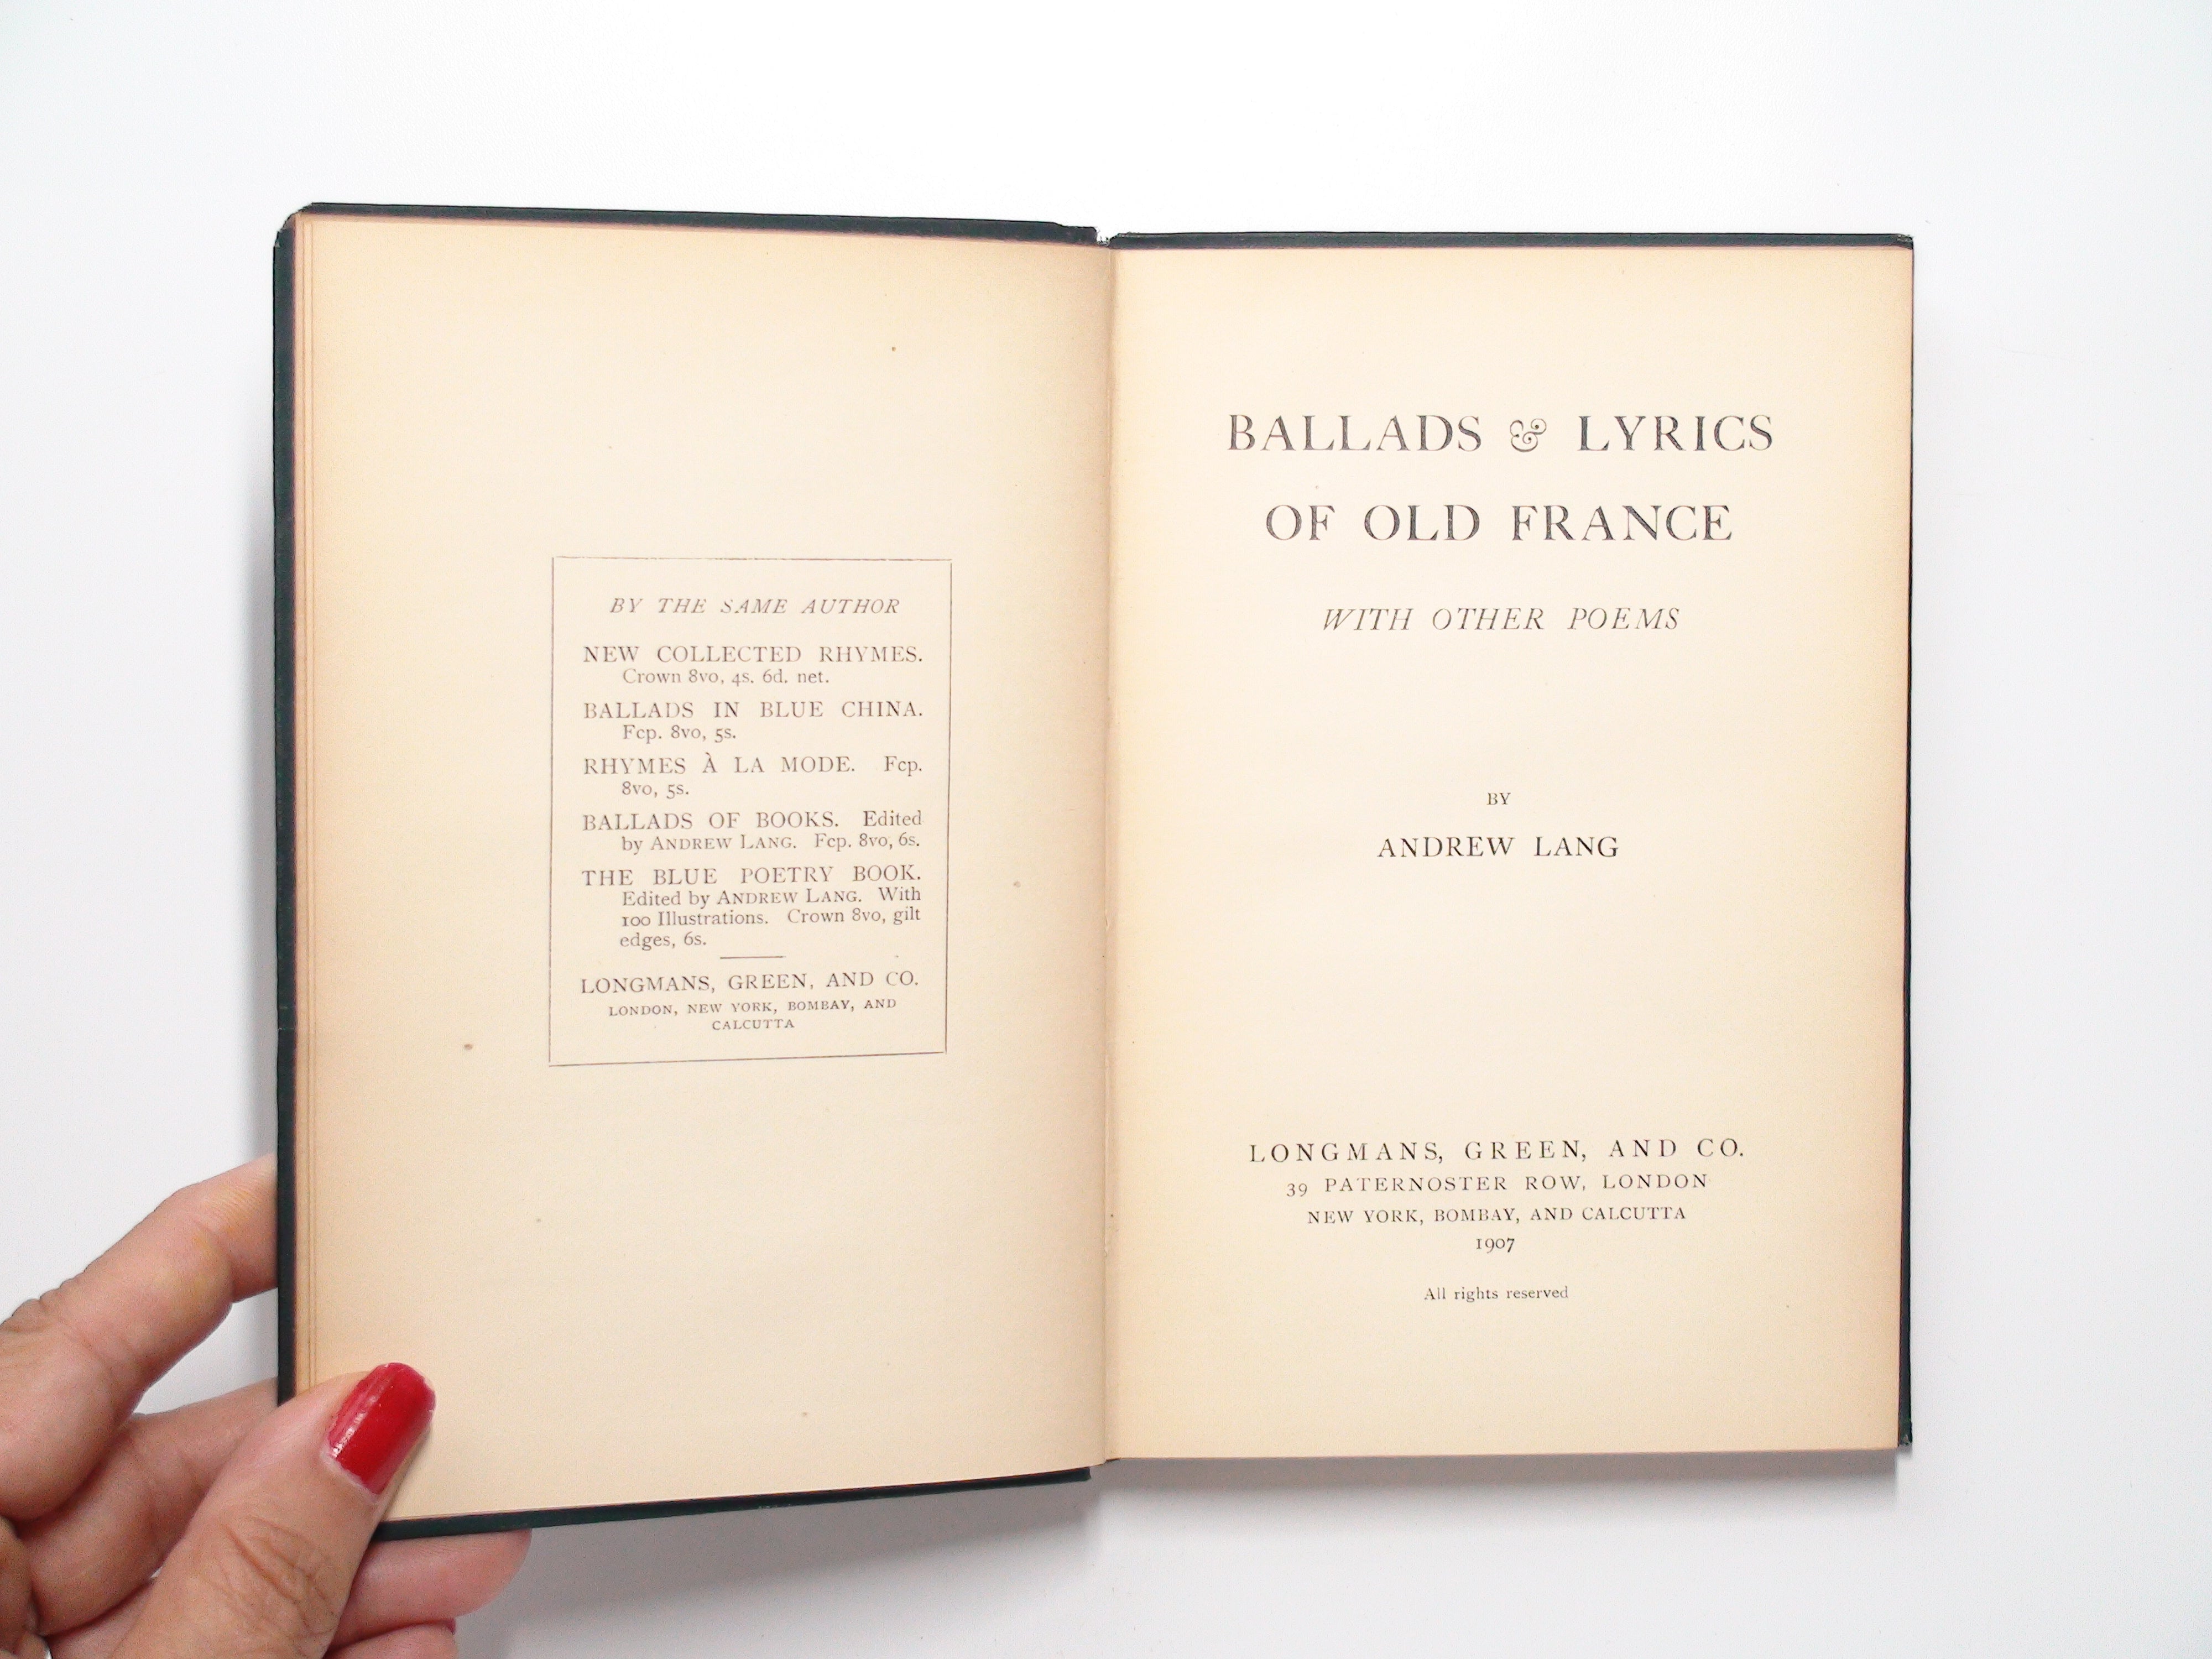 Ballads and Lyrics of Old France, by Andrew Lang, Scarce, 1907